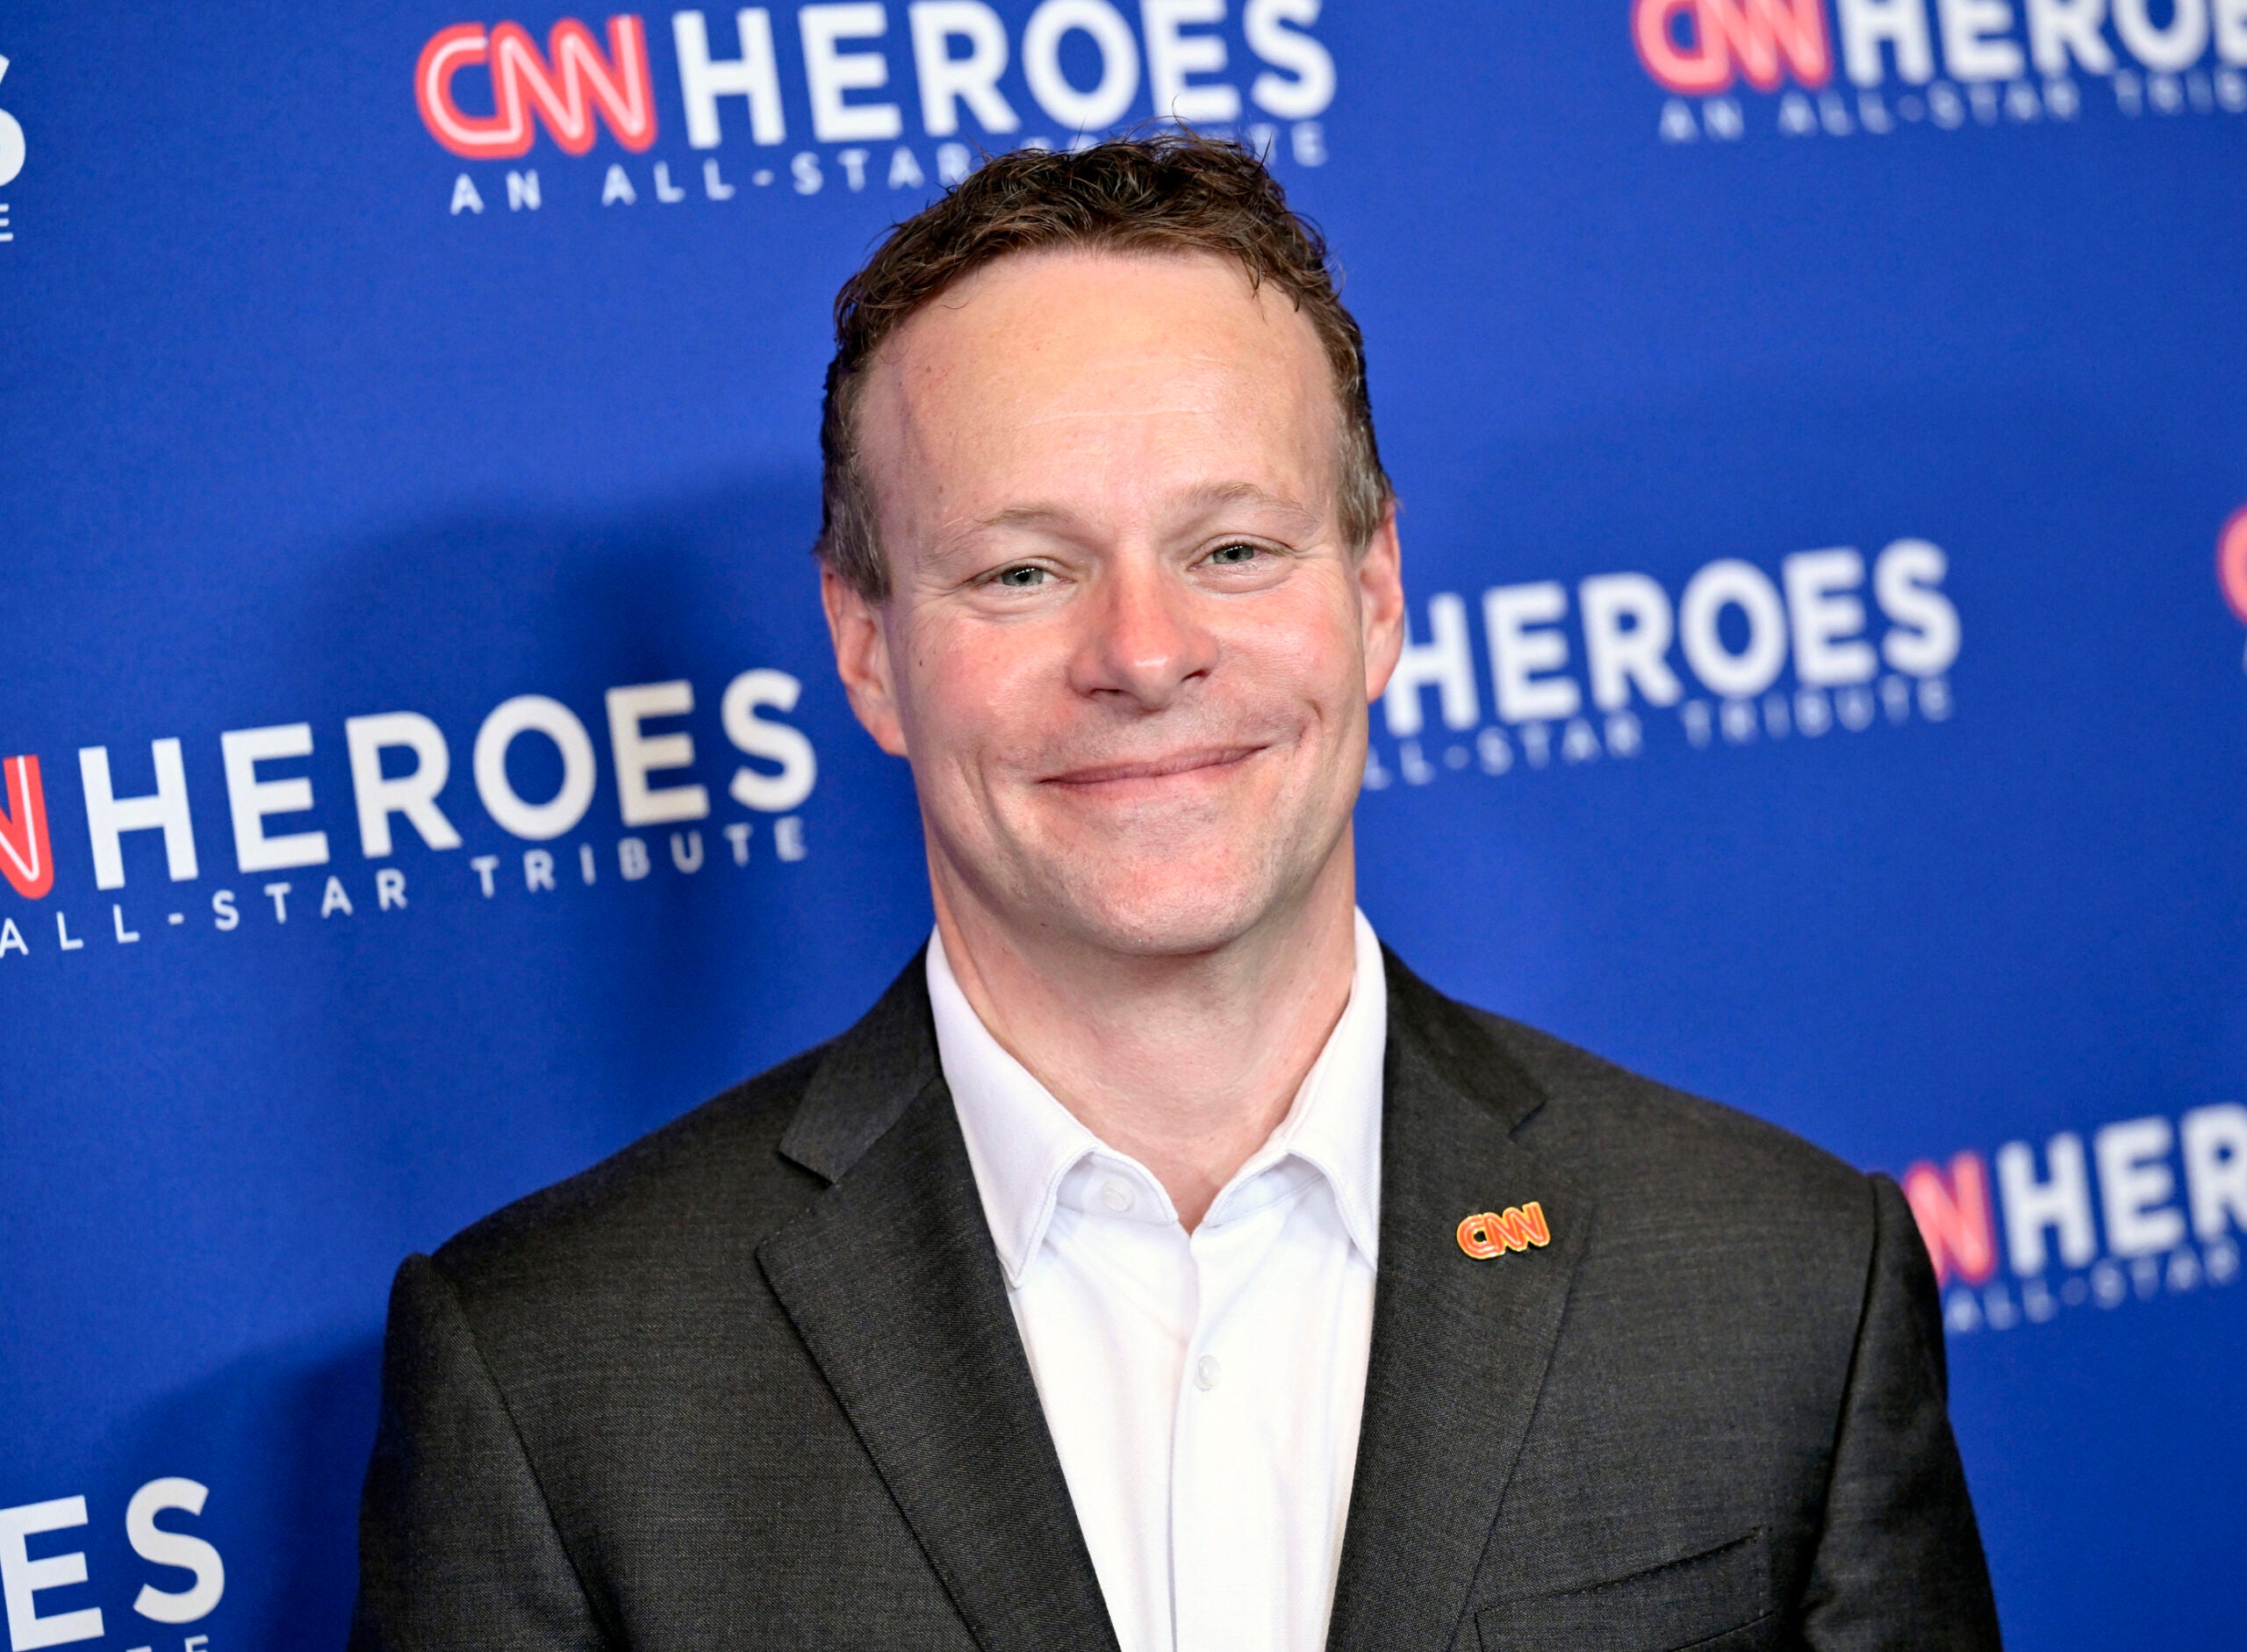 Chris Licht attends the 16th annual CNN Heroes All-Star Tribute on Dec. 11, 2022, in New York.